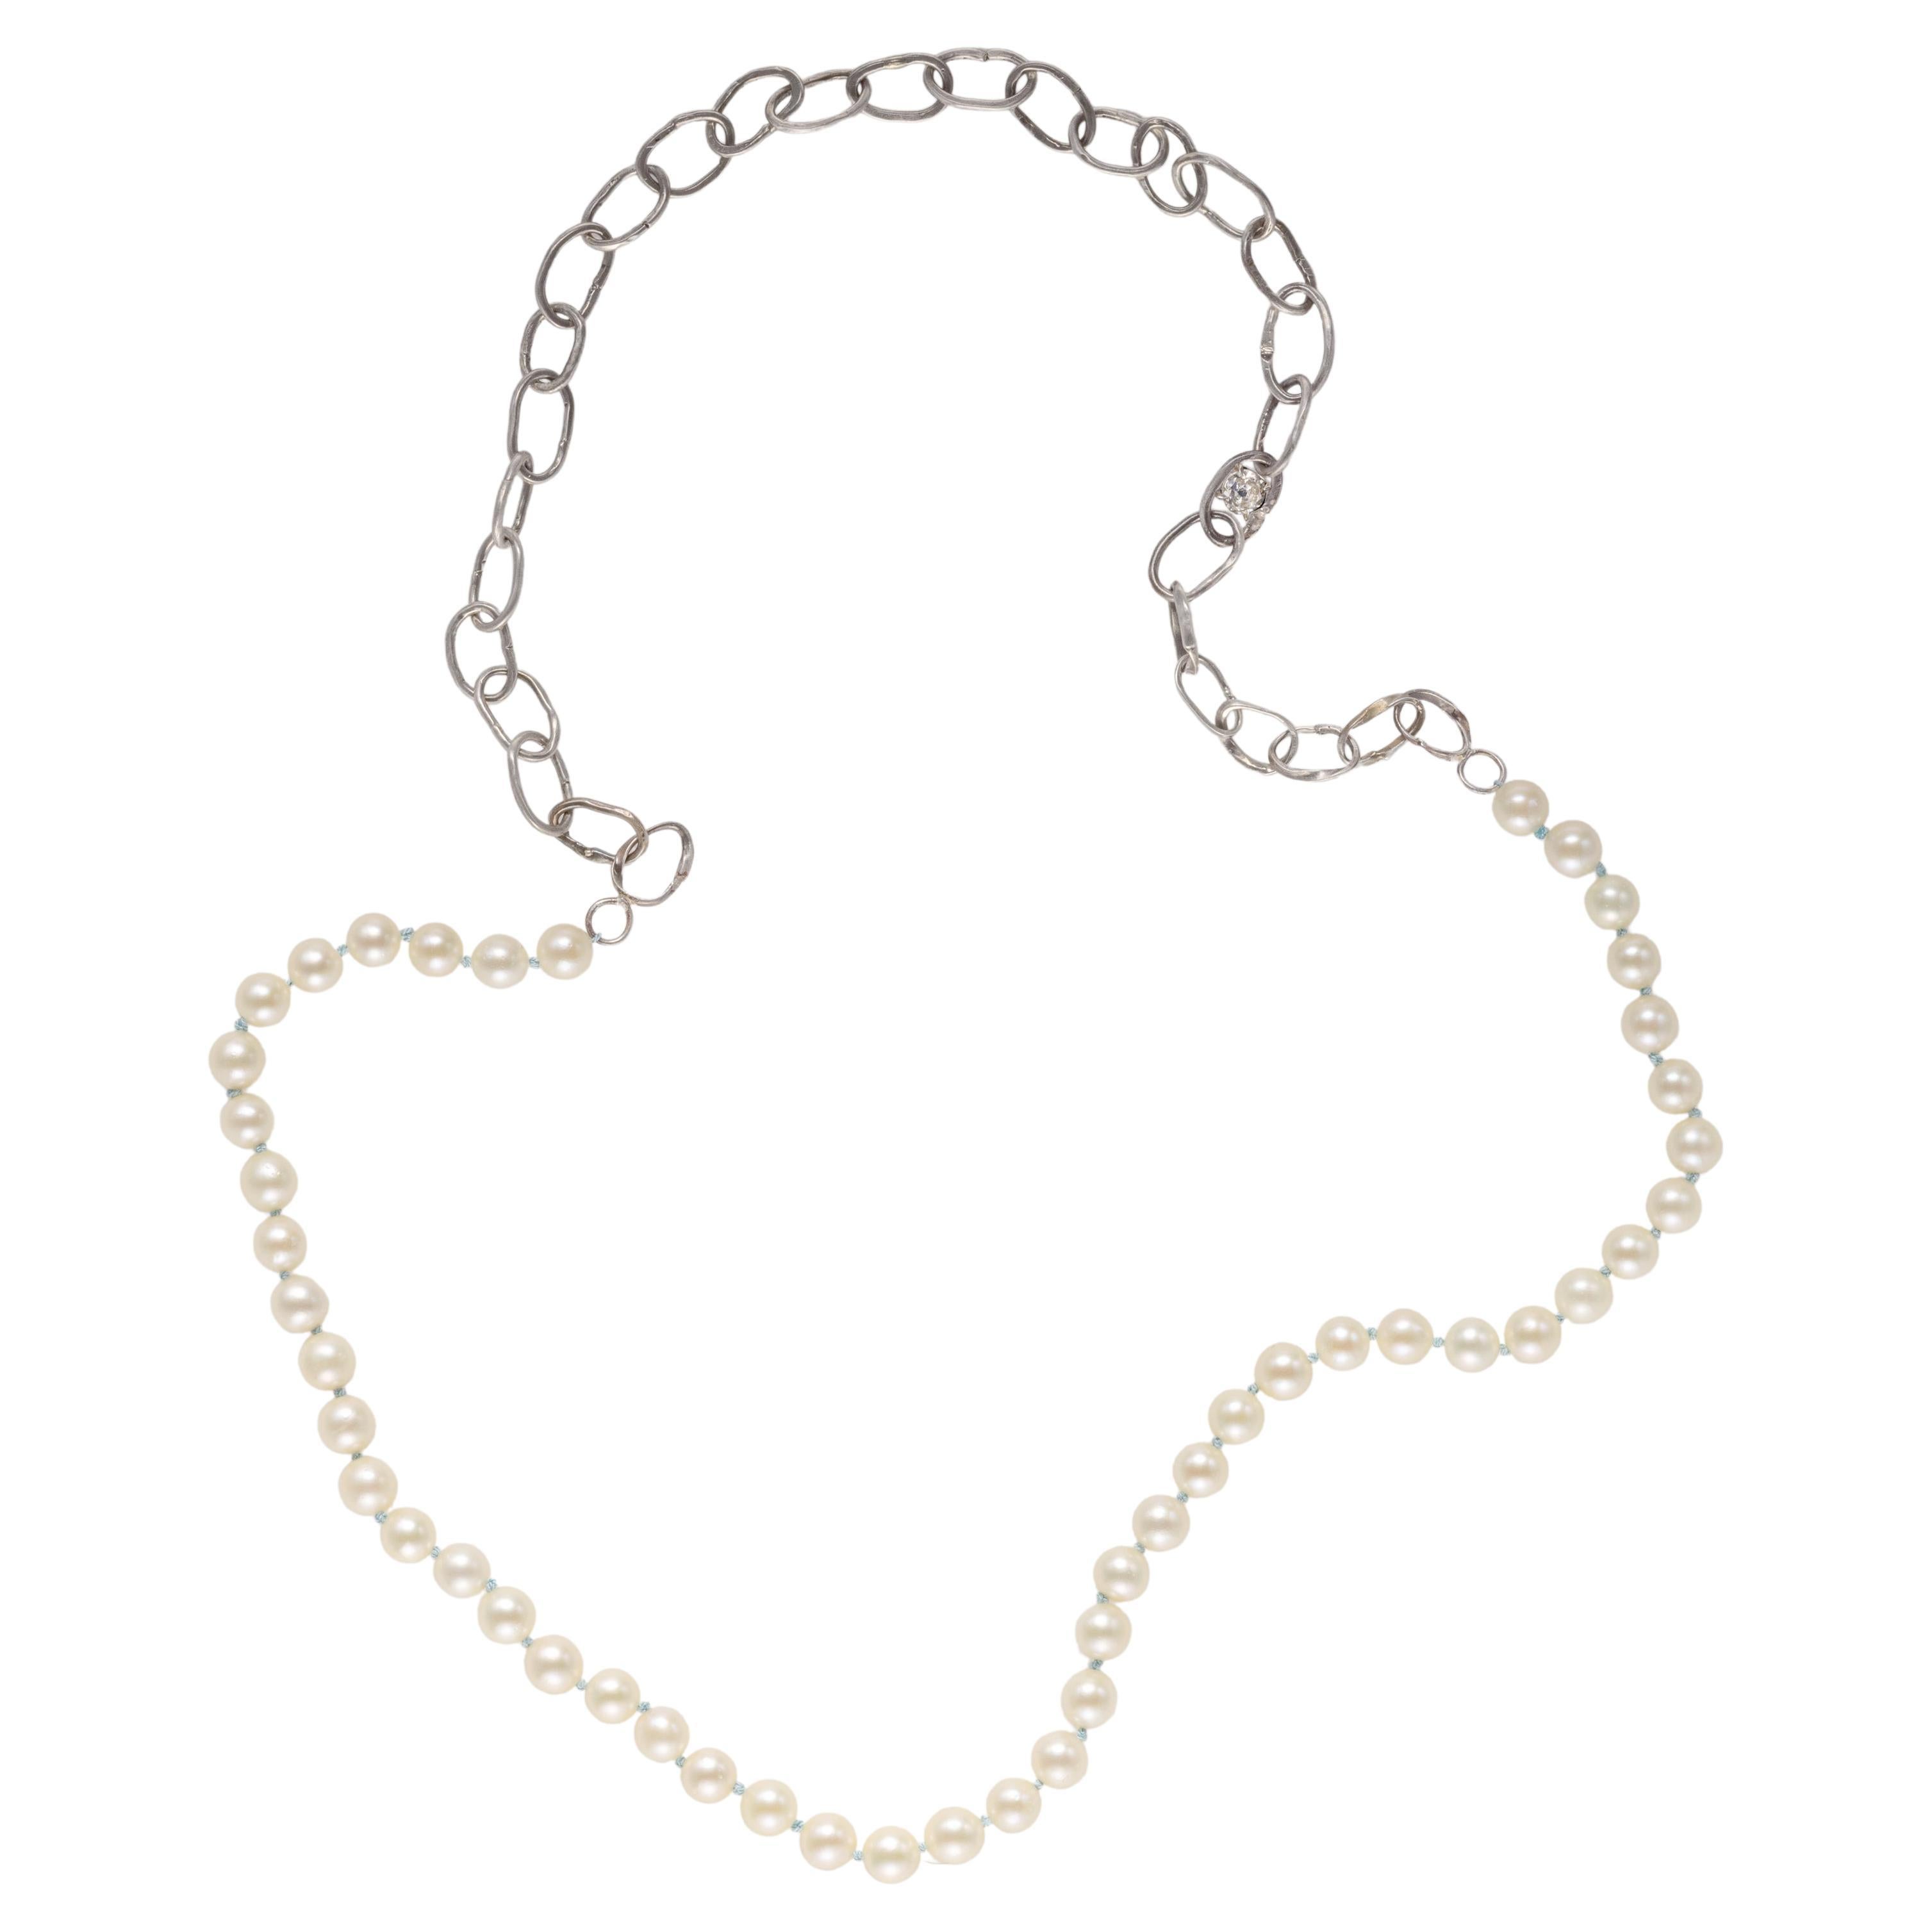 Unisex Akoya Pearl & Chain Necklace with Diamond New For Sale